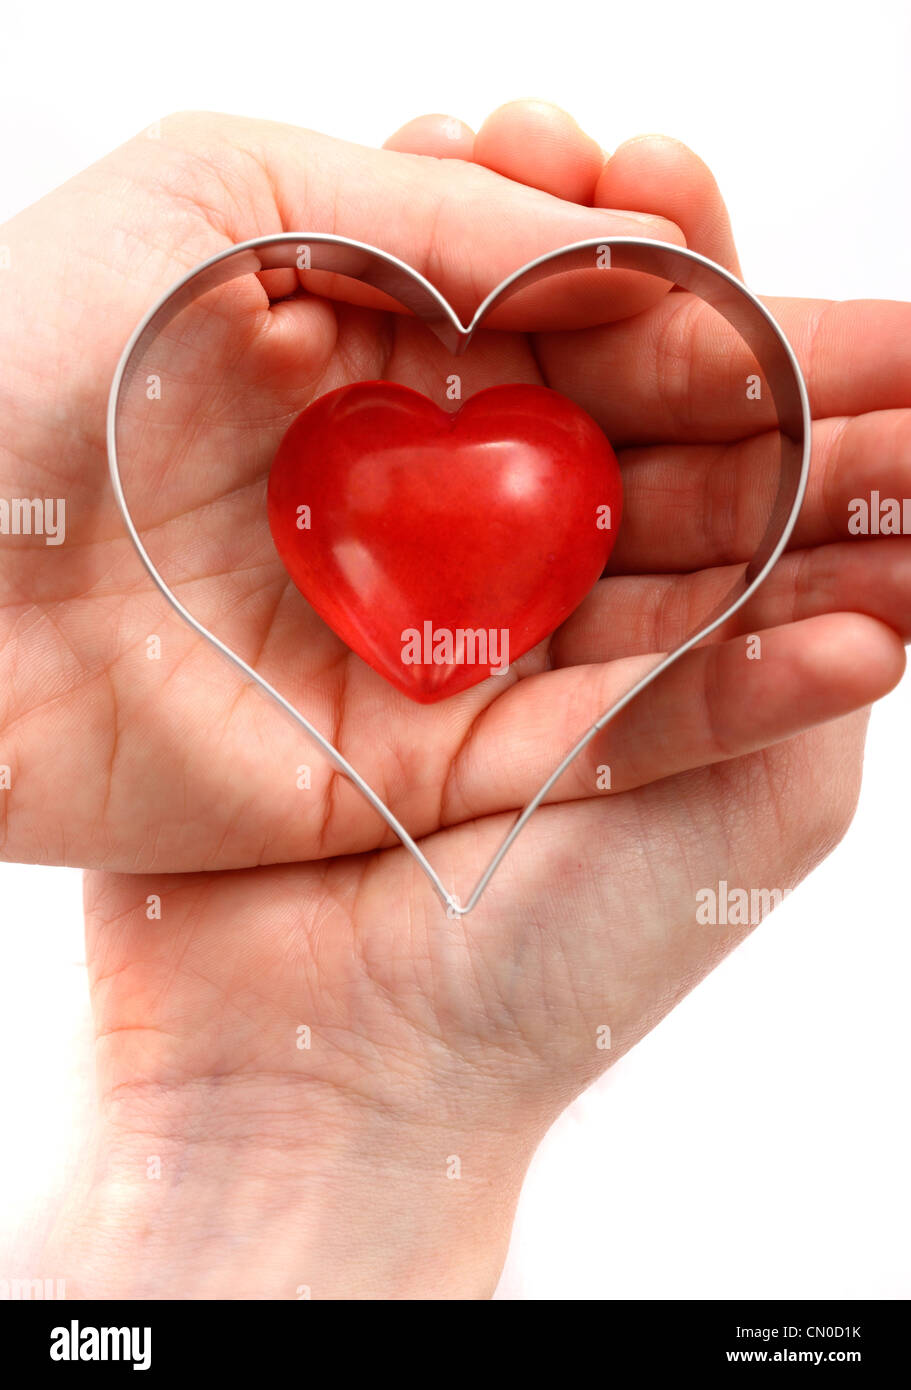 Symbolic image, heart disease, heart attack, protection, prevention, cardiology. Hands holding a red heart. Stock Photo